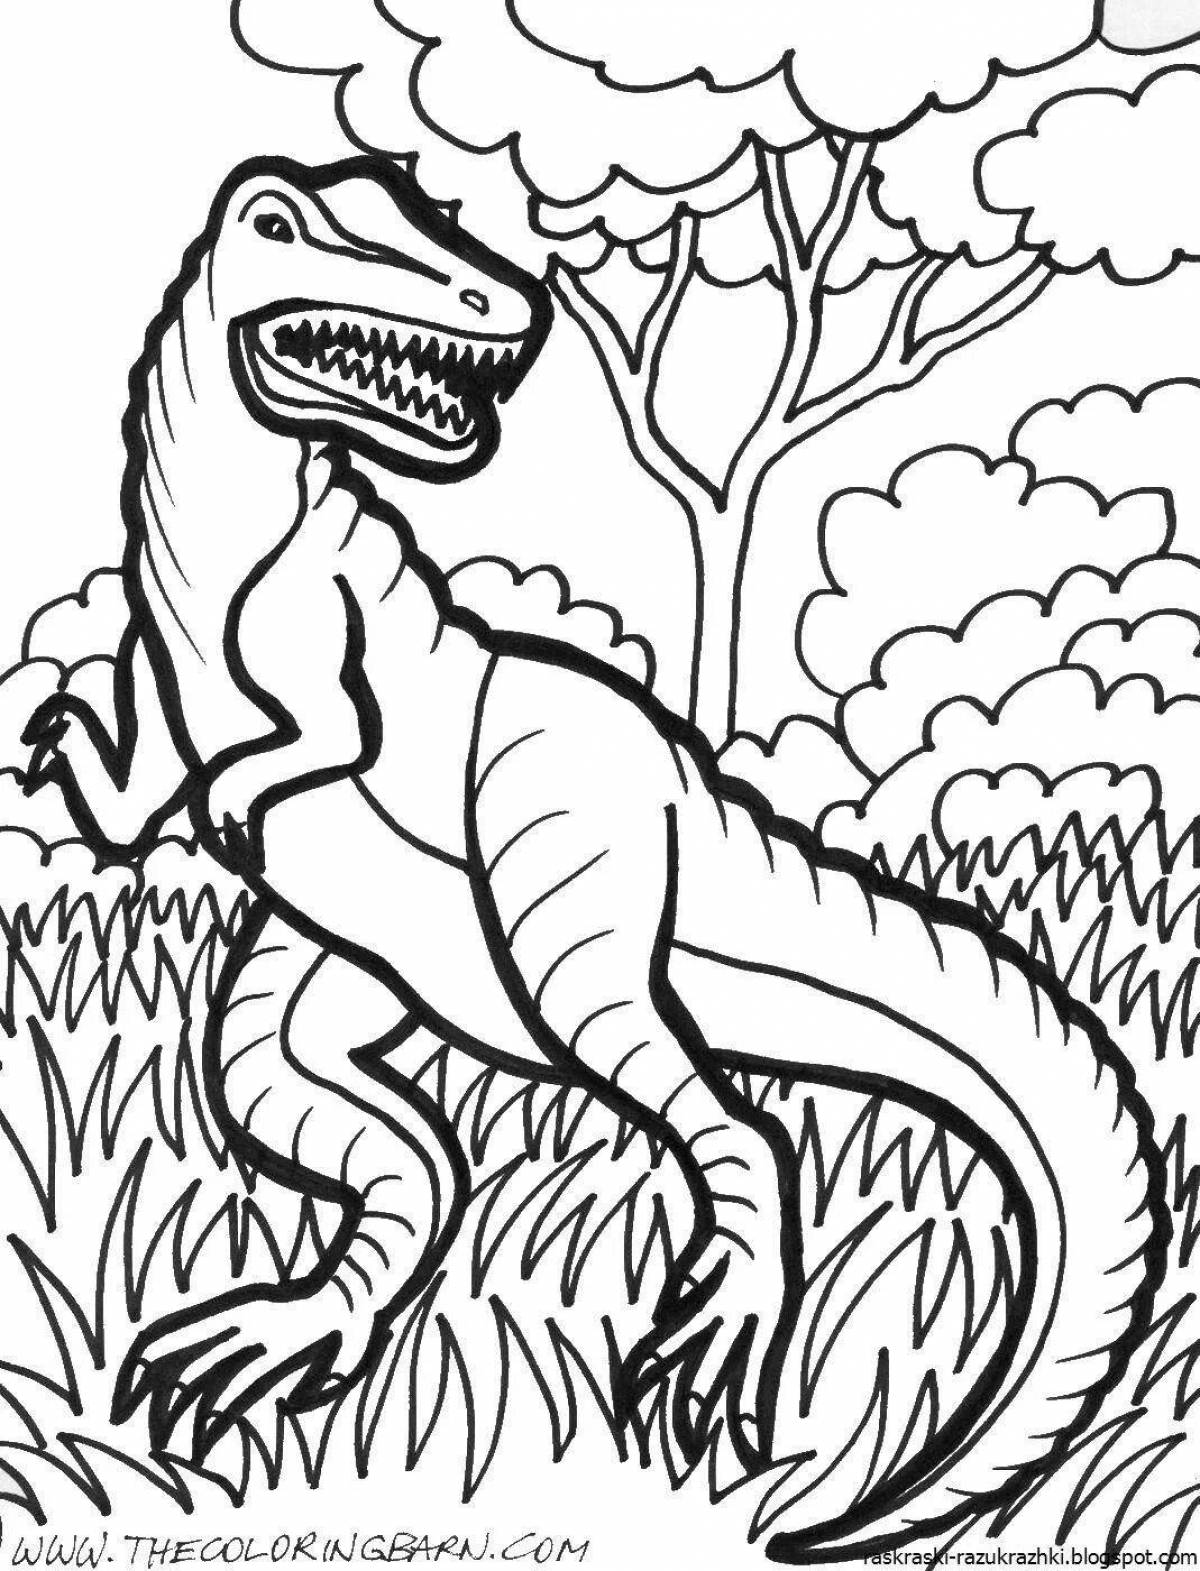 Amazing dinosaurs coloring pages for boys 5-7 years old